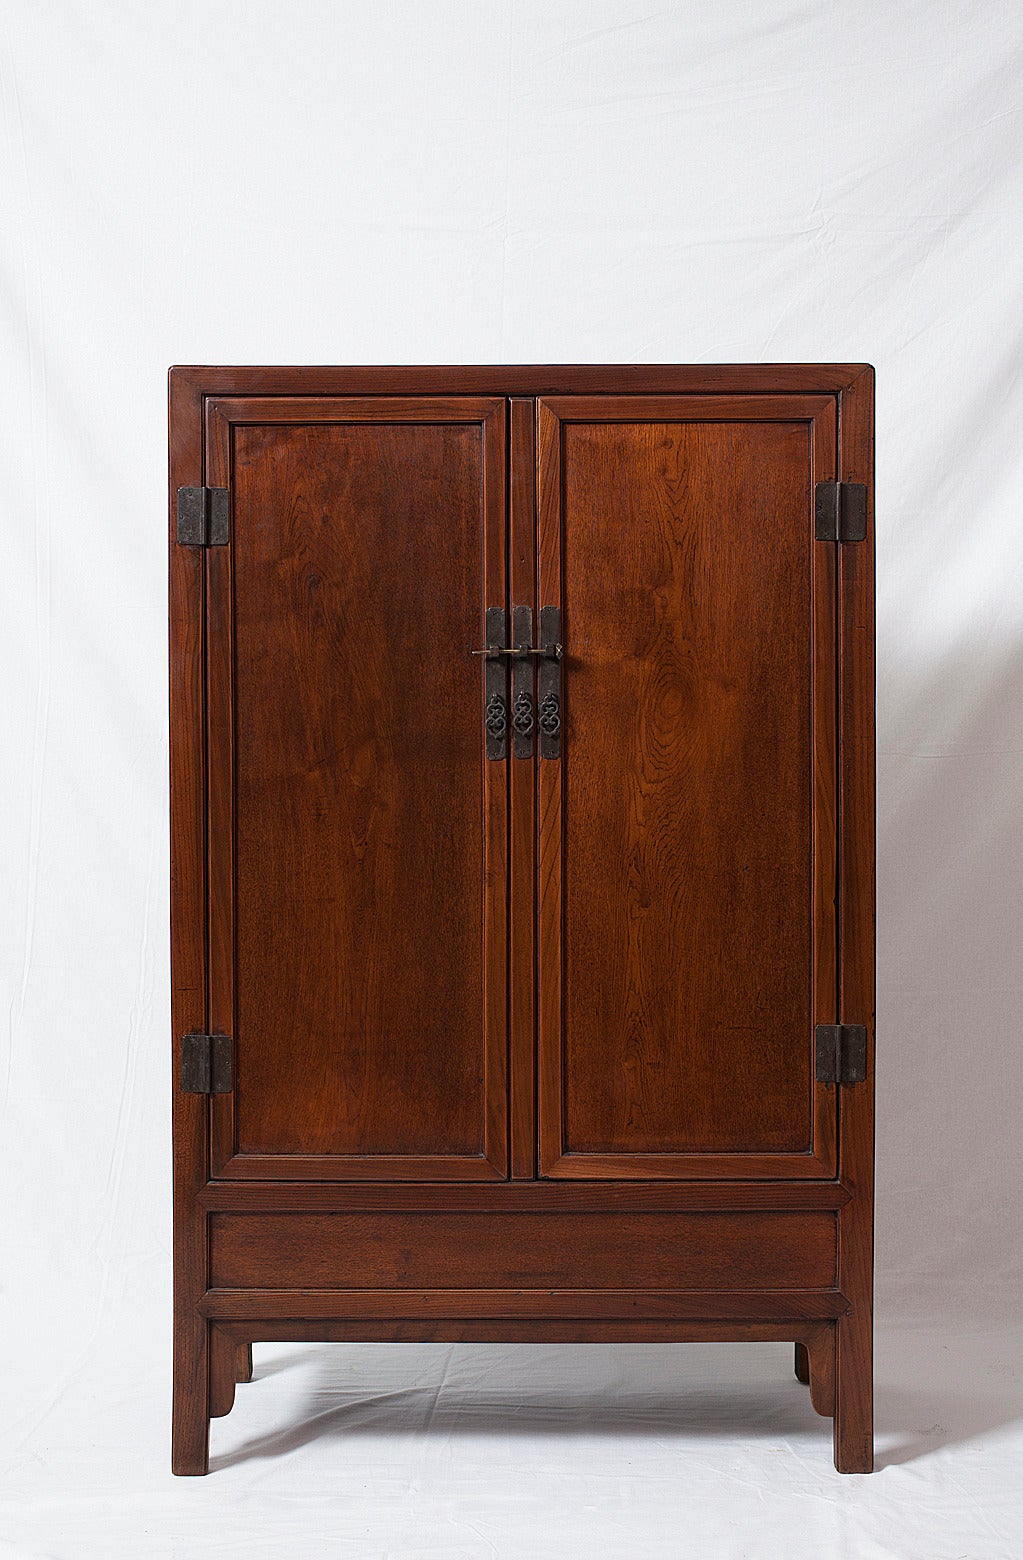 The master carpenters of Suzhou in Jiangsu province made this Minimalist, perfectly proportioned square-corner cabinet. 

Made from honey-colored elmwood, this cabinet has two doors with a removable stile in between and a panel below the doors. A